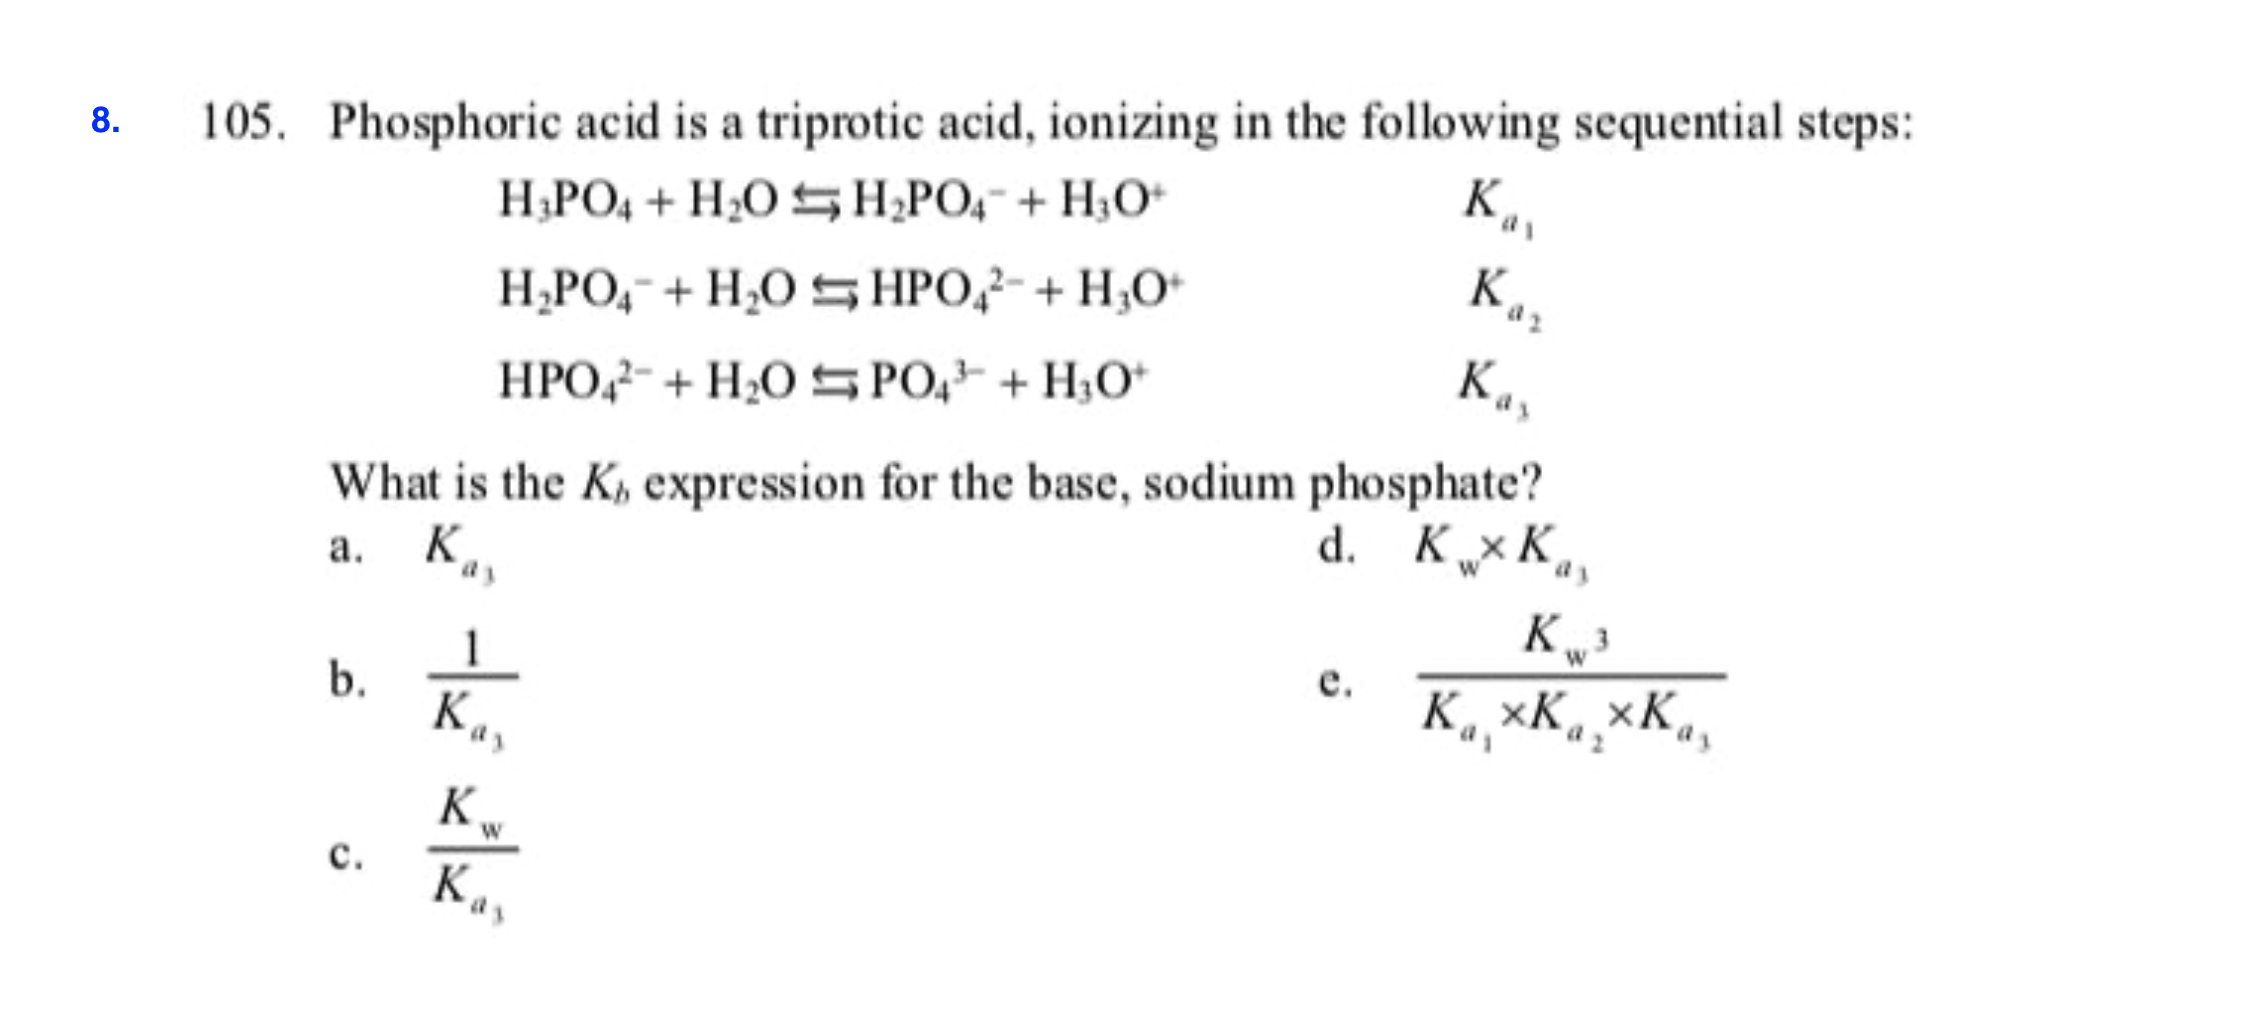 105. Phosphoric acid is a triprotic acid, ionizing in the following sequential steps:
8
К,
Н.РО, + H.0 н,РО, + Н,О-
Ка,
H POHOsHPOHO
Кл,
HPO H2OS PO HO
What is the K expression for the base, sodium phosphate?
а. К
d. КхК,,
кр
К, хК, хК.
1
b.
К.,
е.
K
с.
К,
